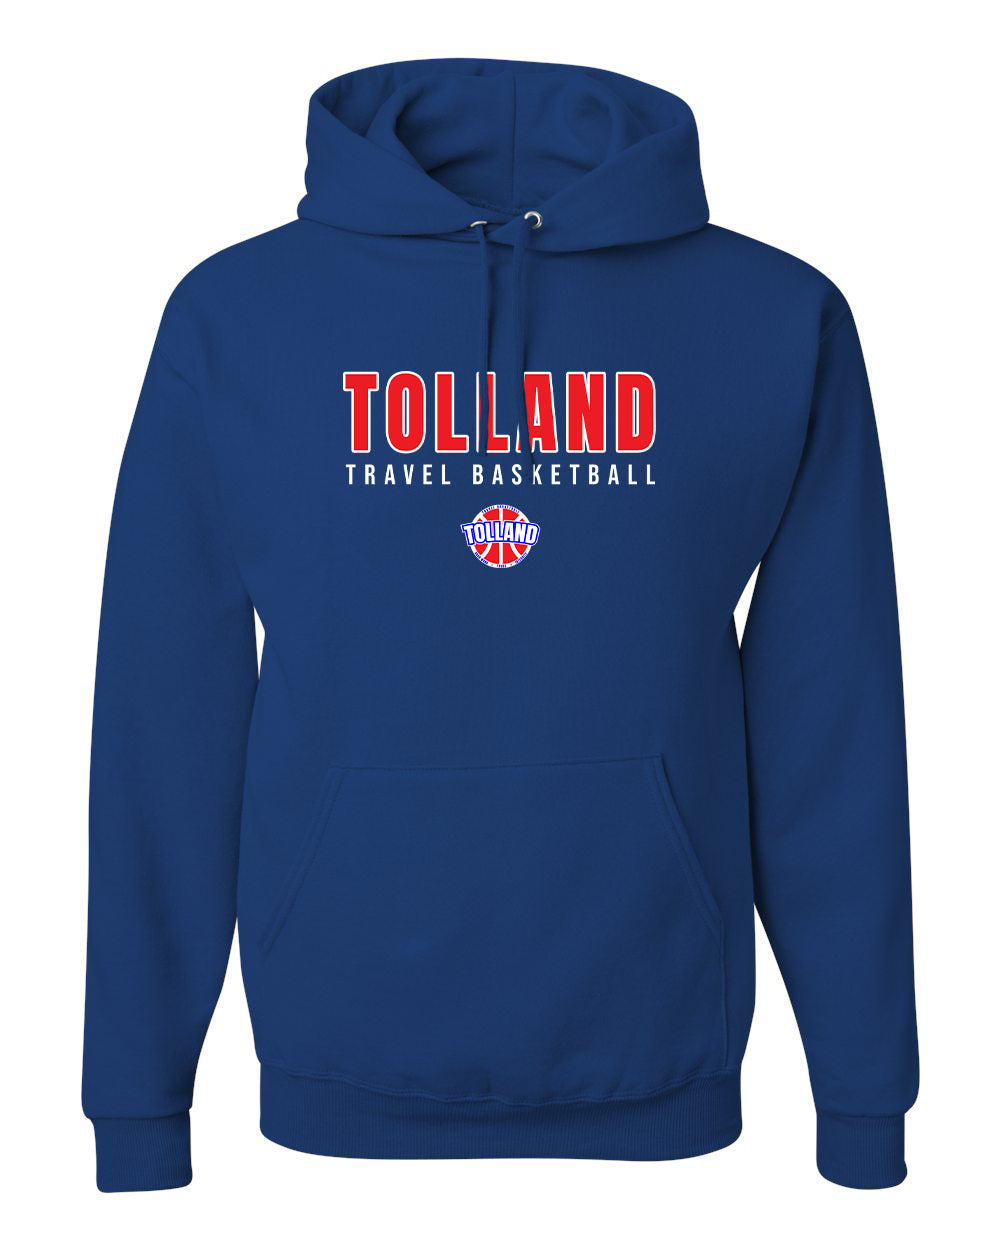 Tolland TB Adult Hoodie "TTB" - 996MR (color options available)